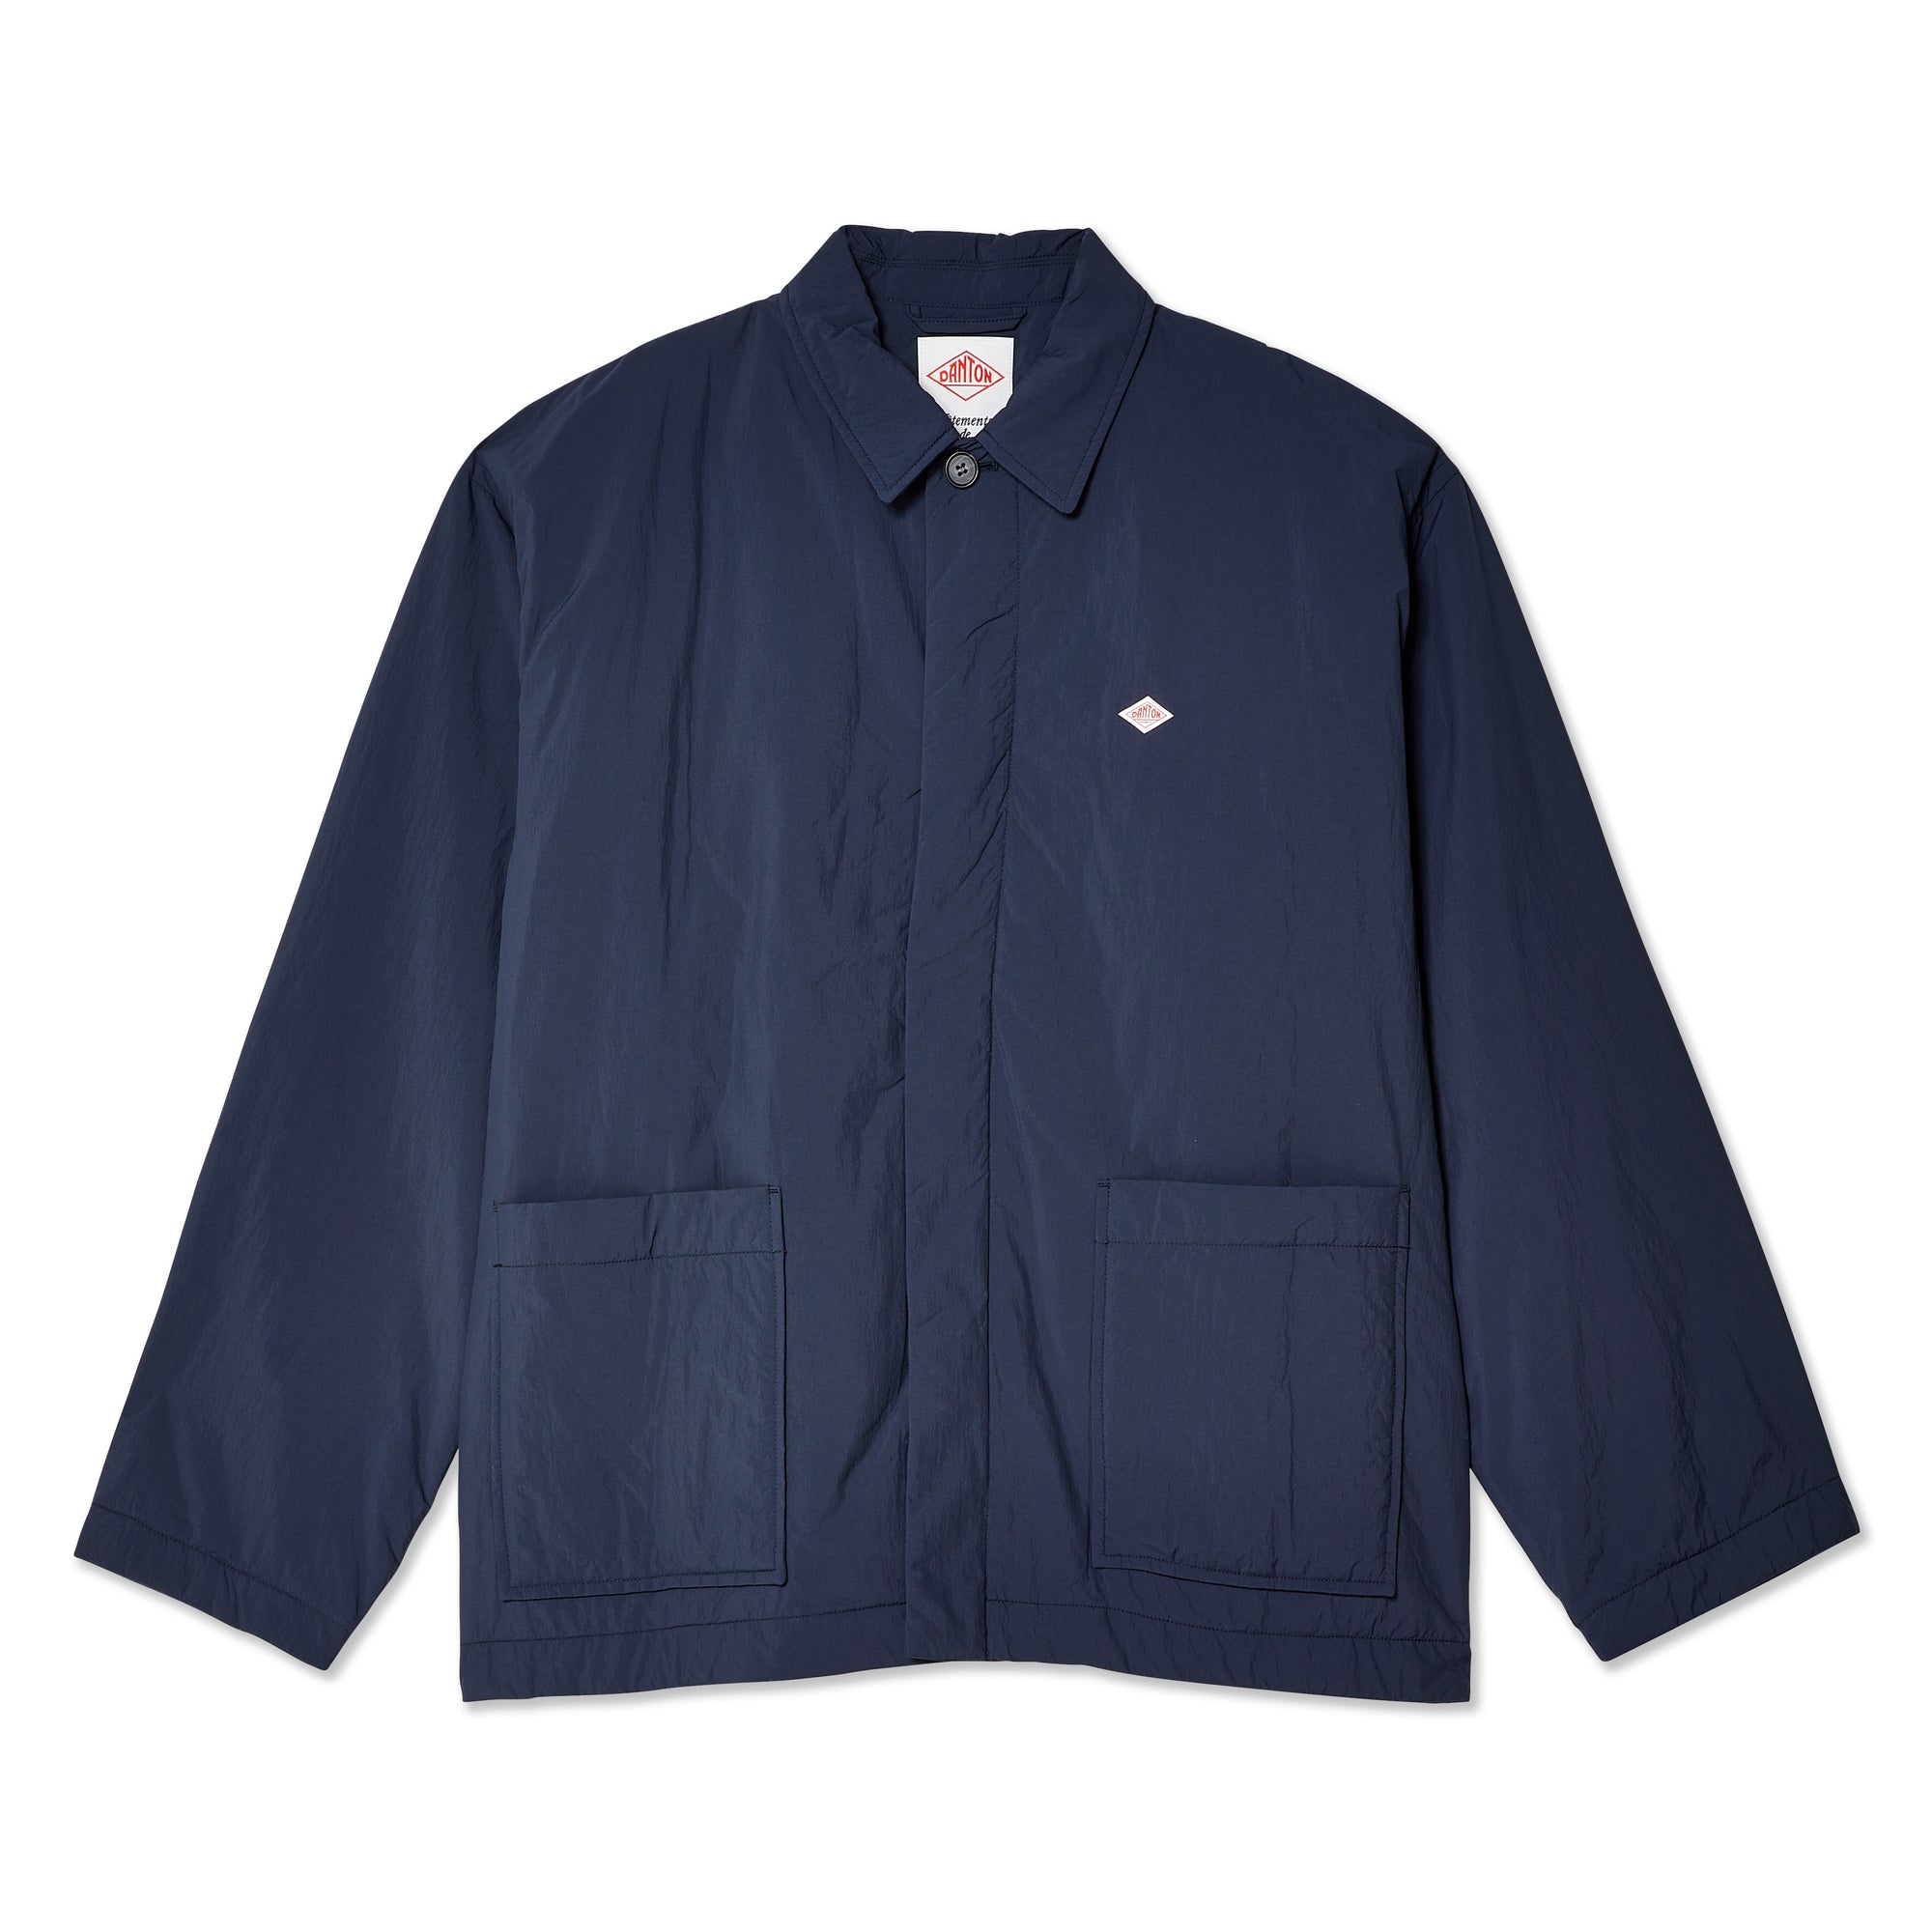 Danton - Men's French Coverall Jacket - (Navy) view 1